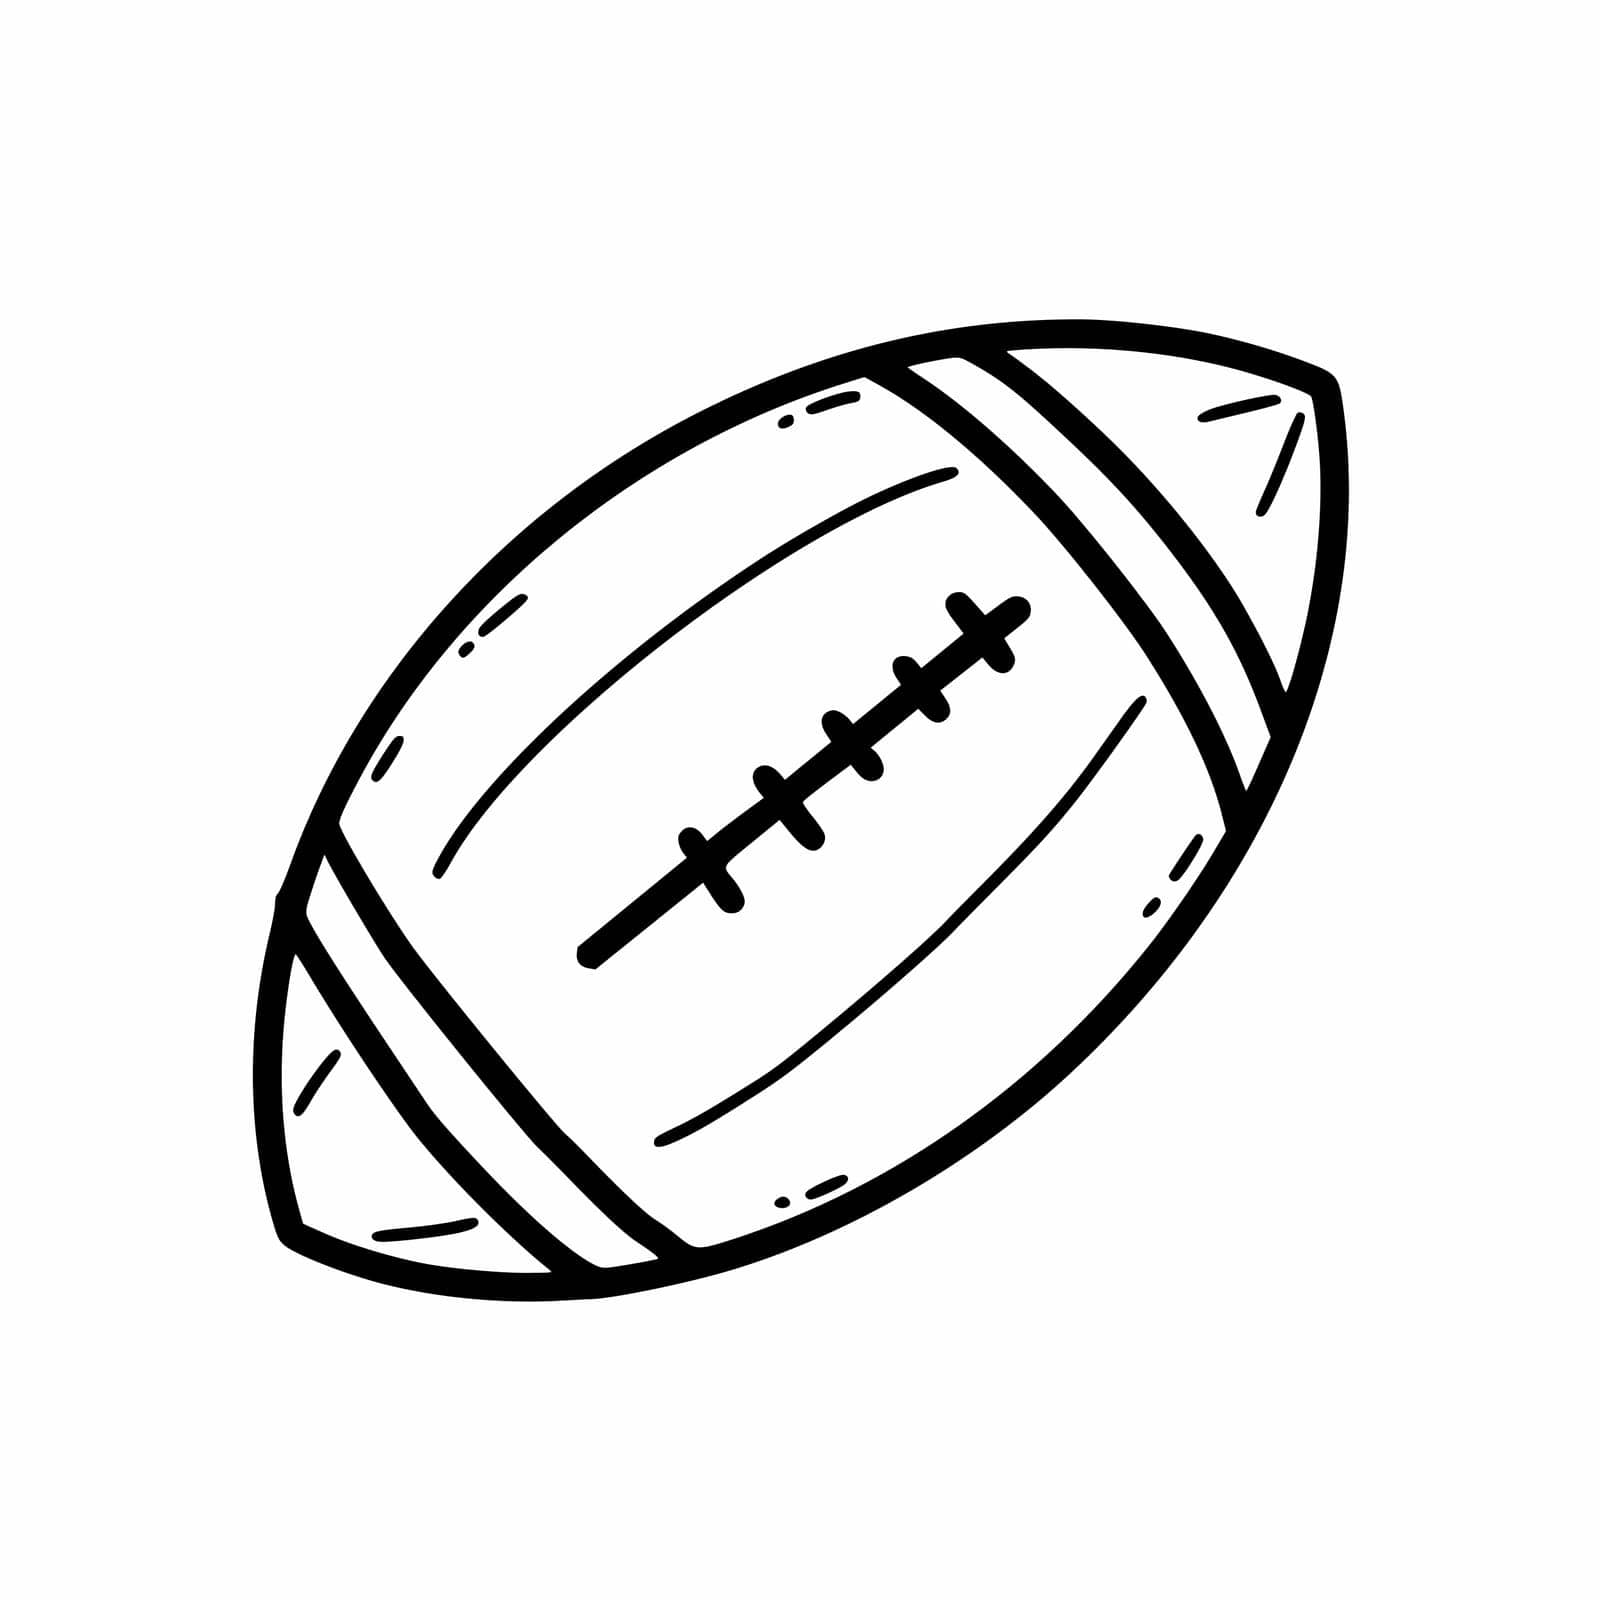 Ball for American football. National sport. Fumble. Vector doodle illustration. Rugby.